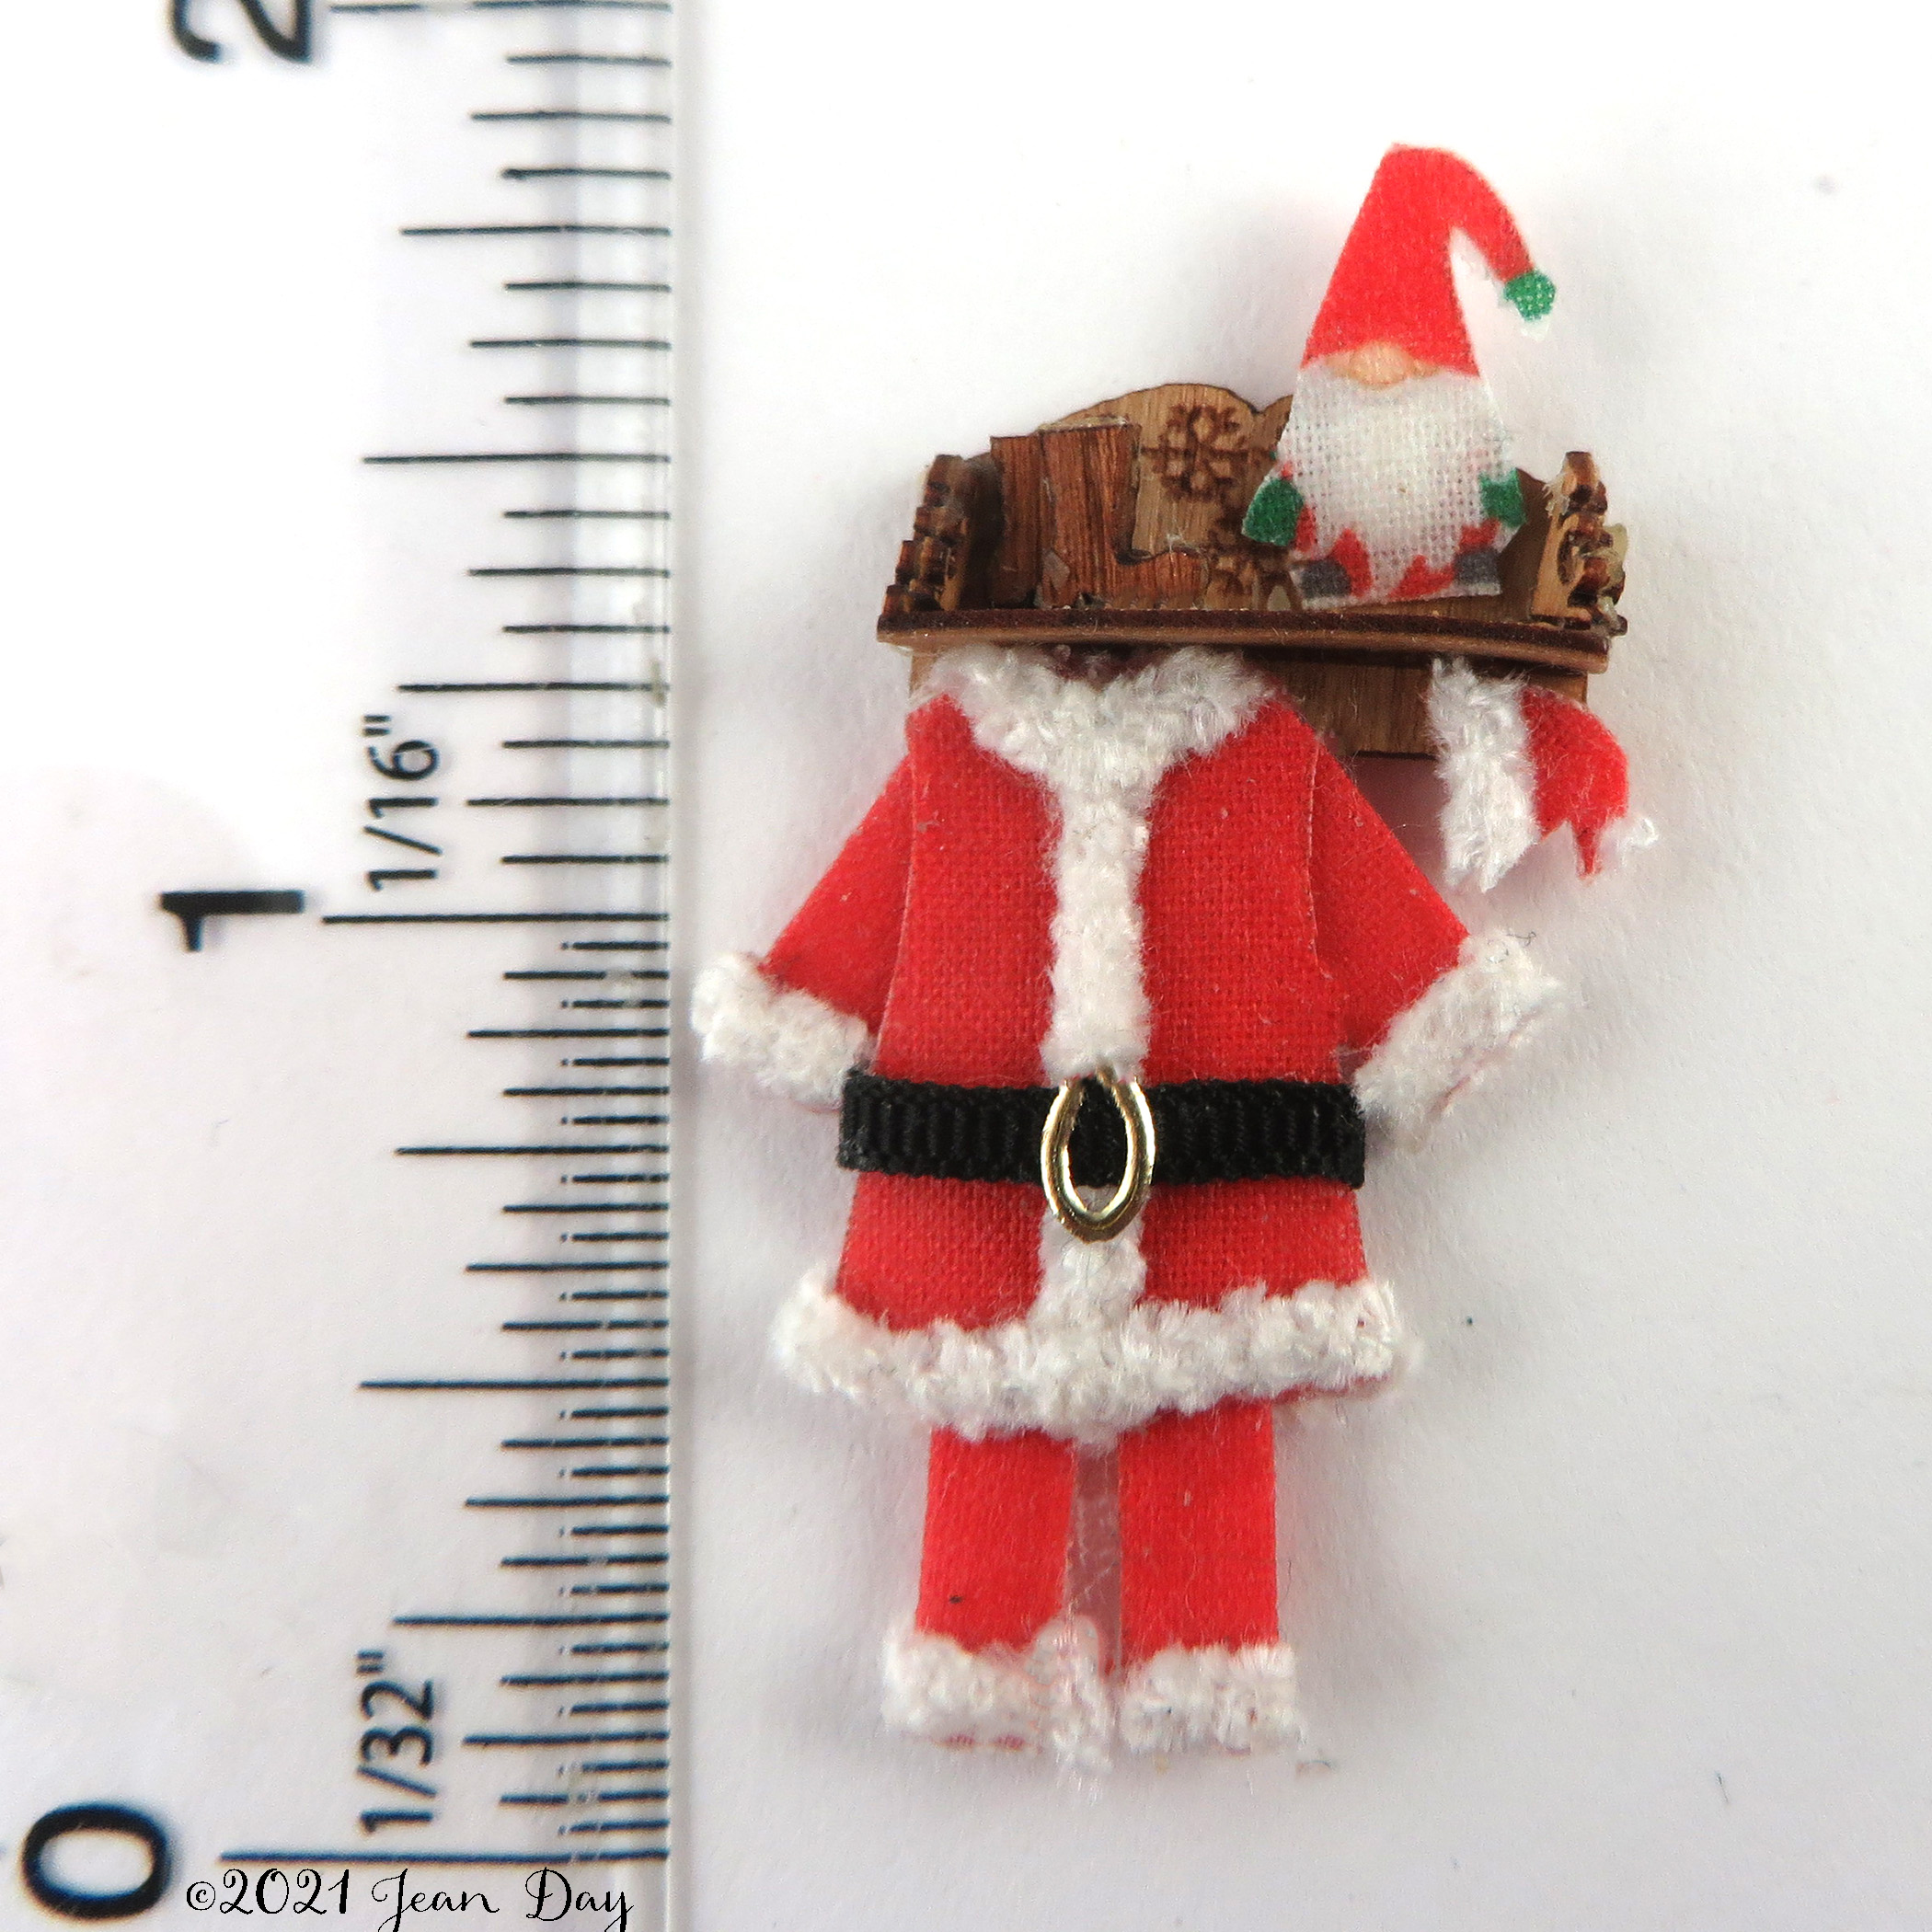 Santa Claus Outfit and Shelf1:48 LC134